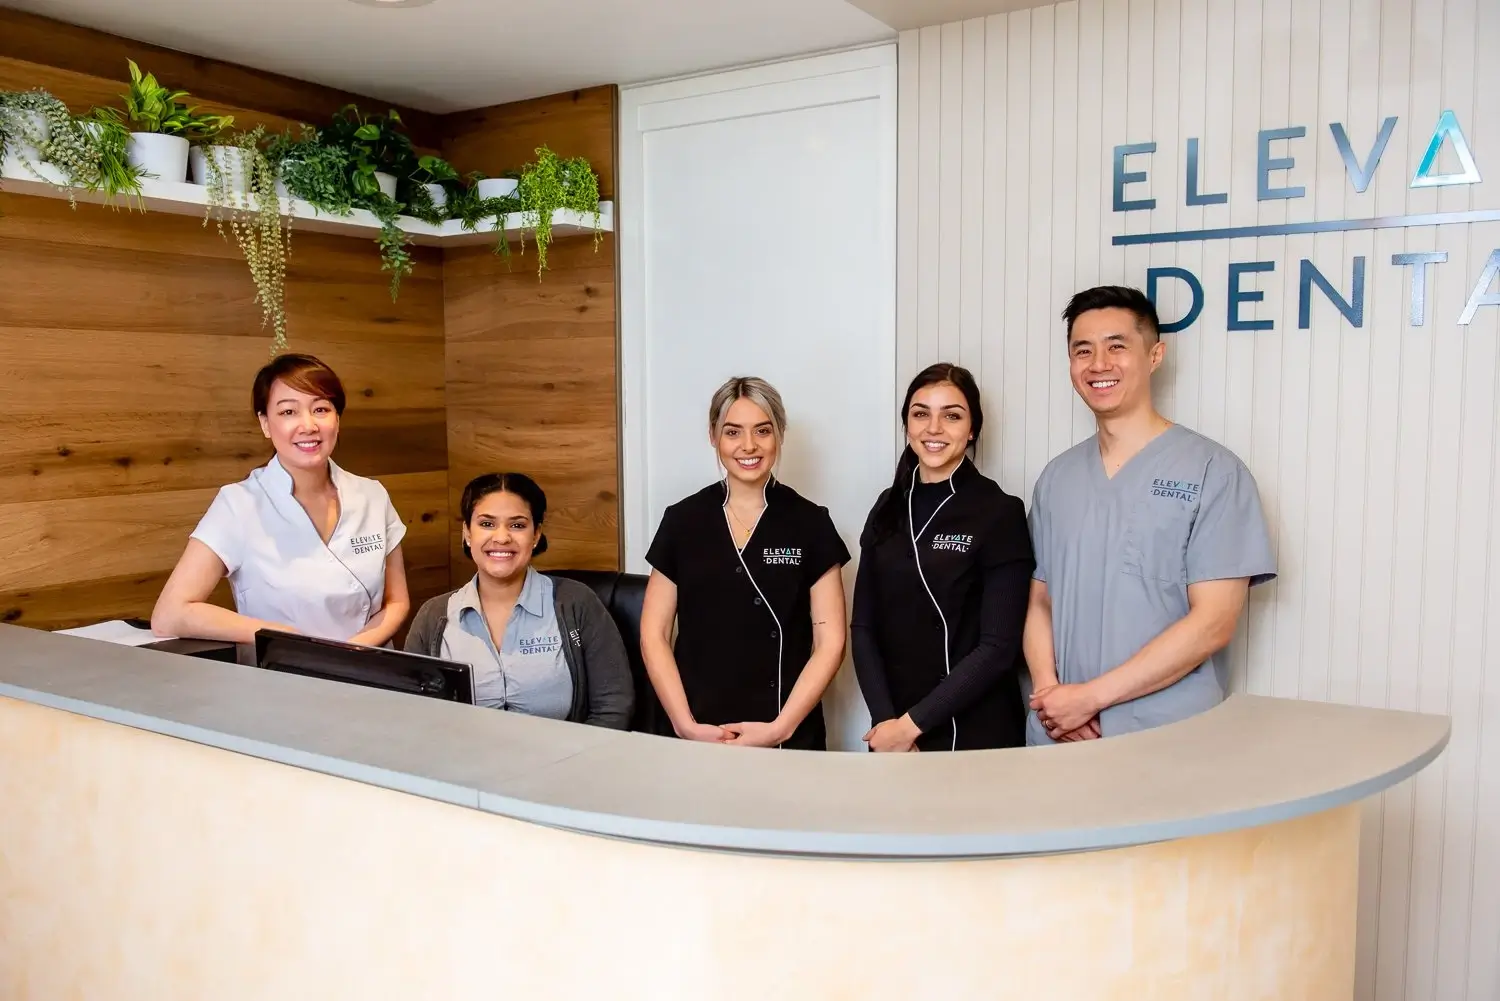 The team at Elevate Dental